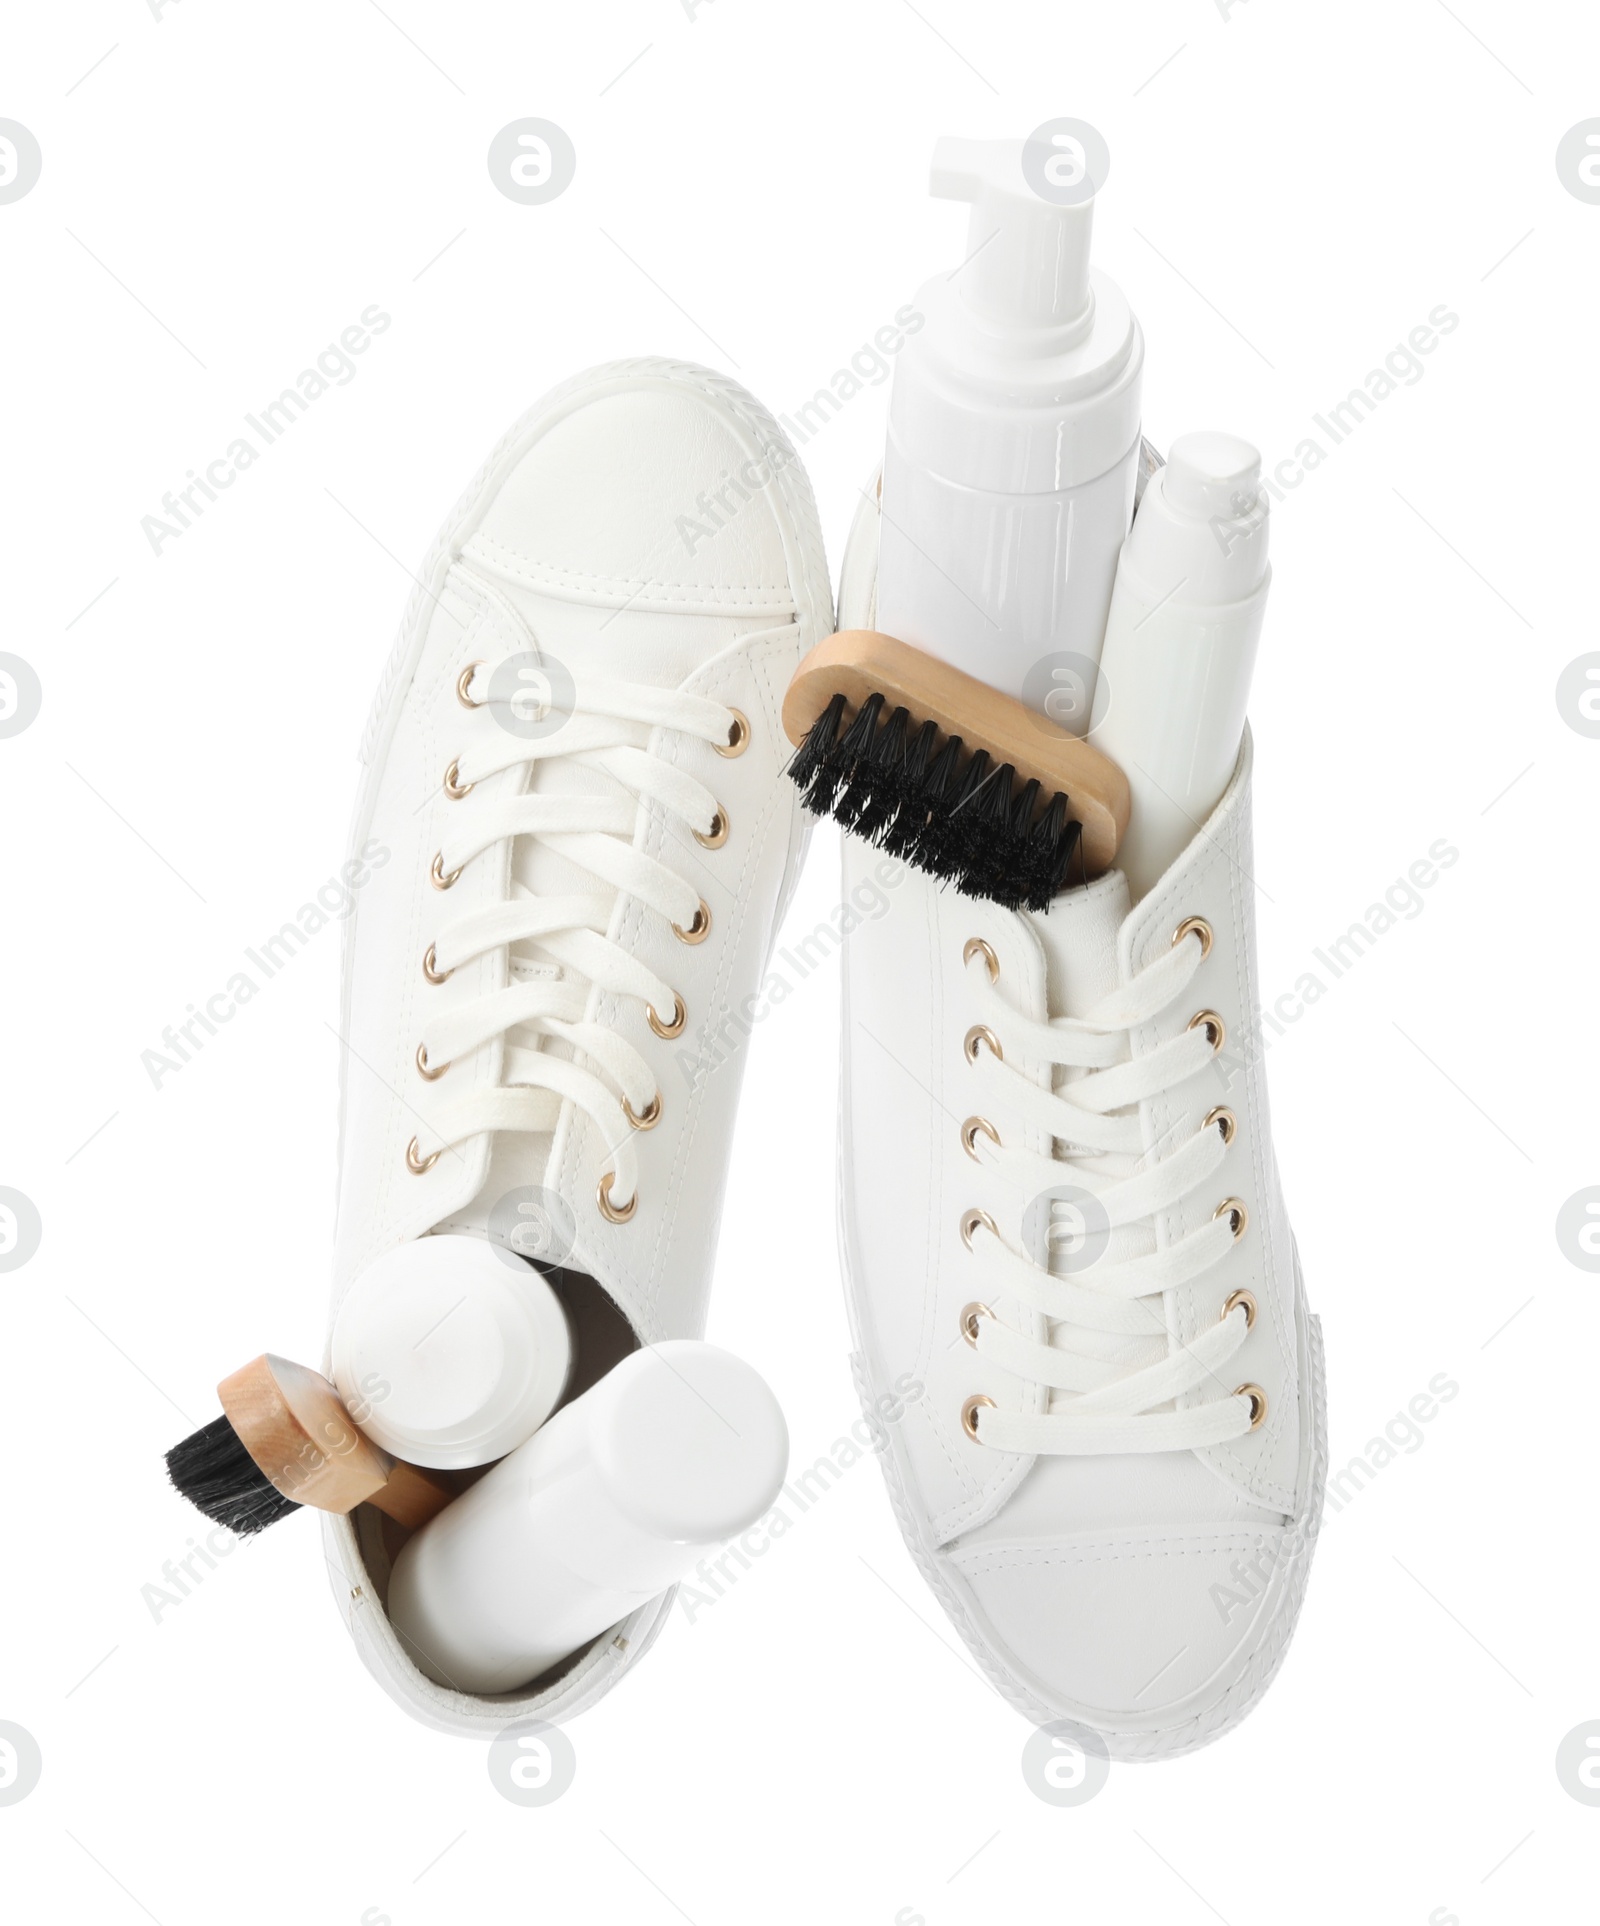 Photo of Stylish footwear with shoe care accessories on white background, top view